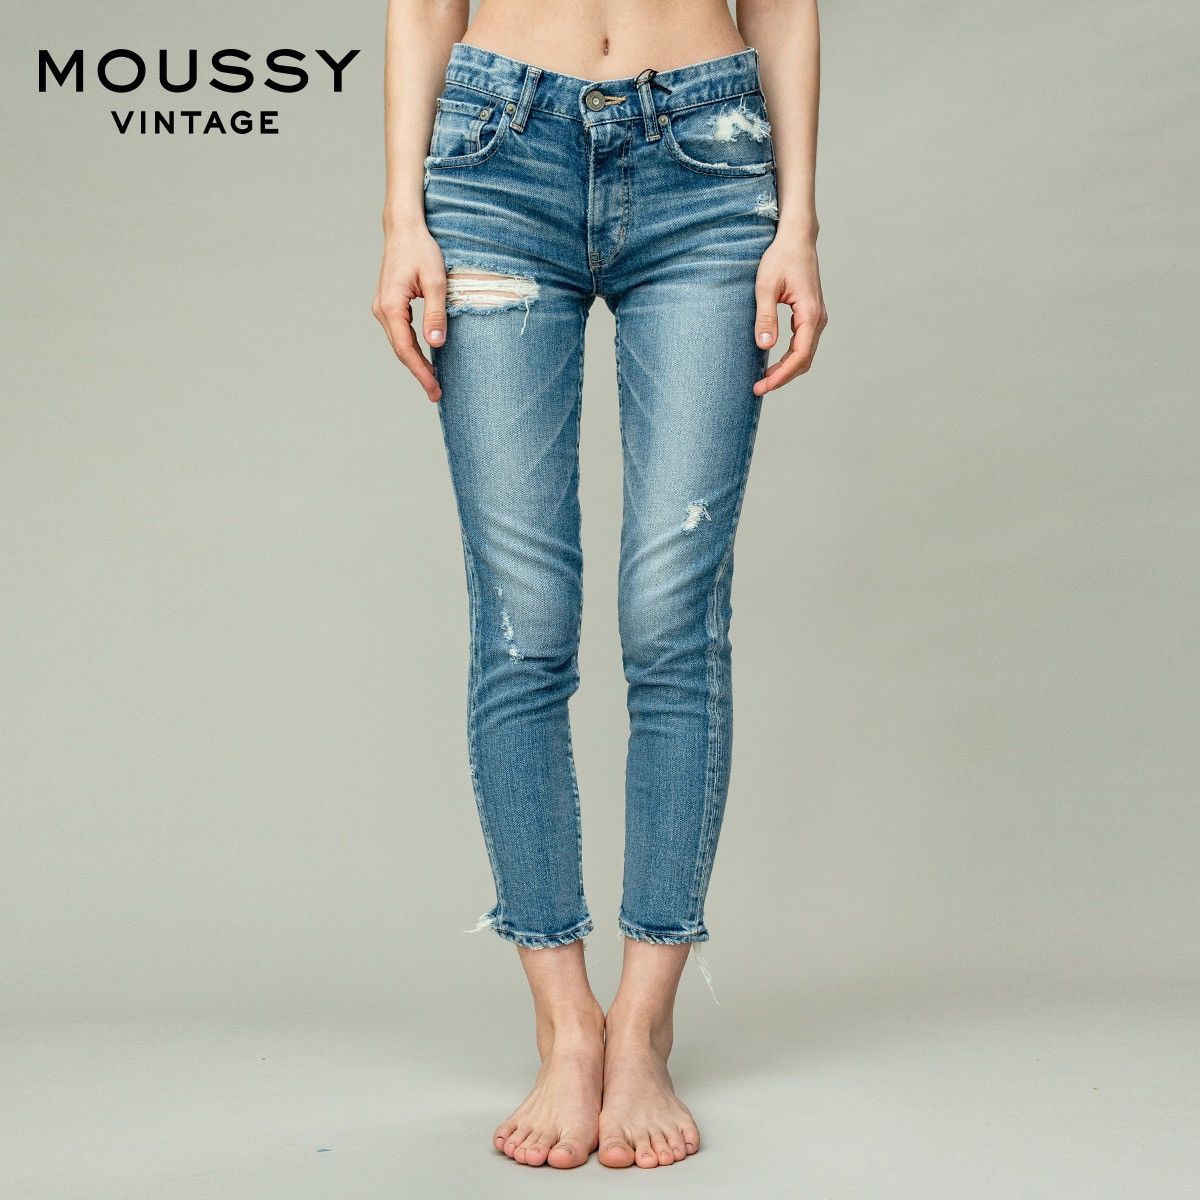 Japanese Brand Moussy Vintage Distressed Blue Jeans Size 27" / US 4 / IT 40 - 1 Preview